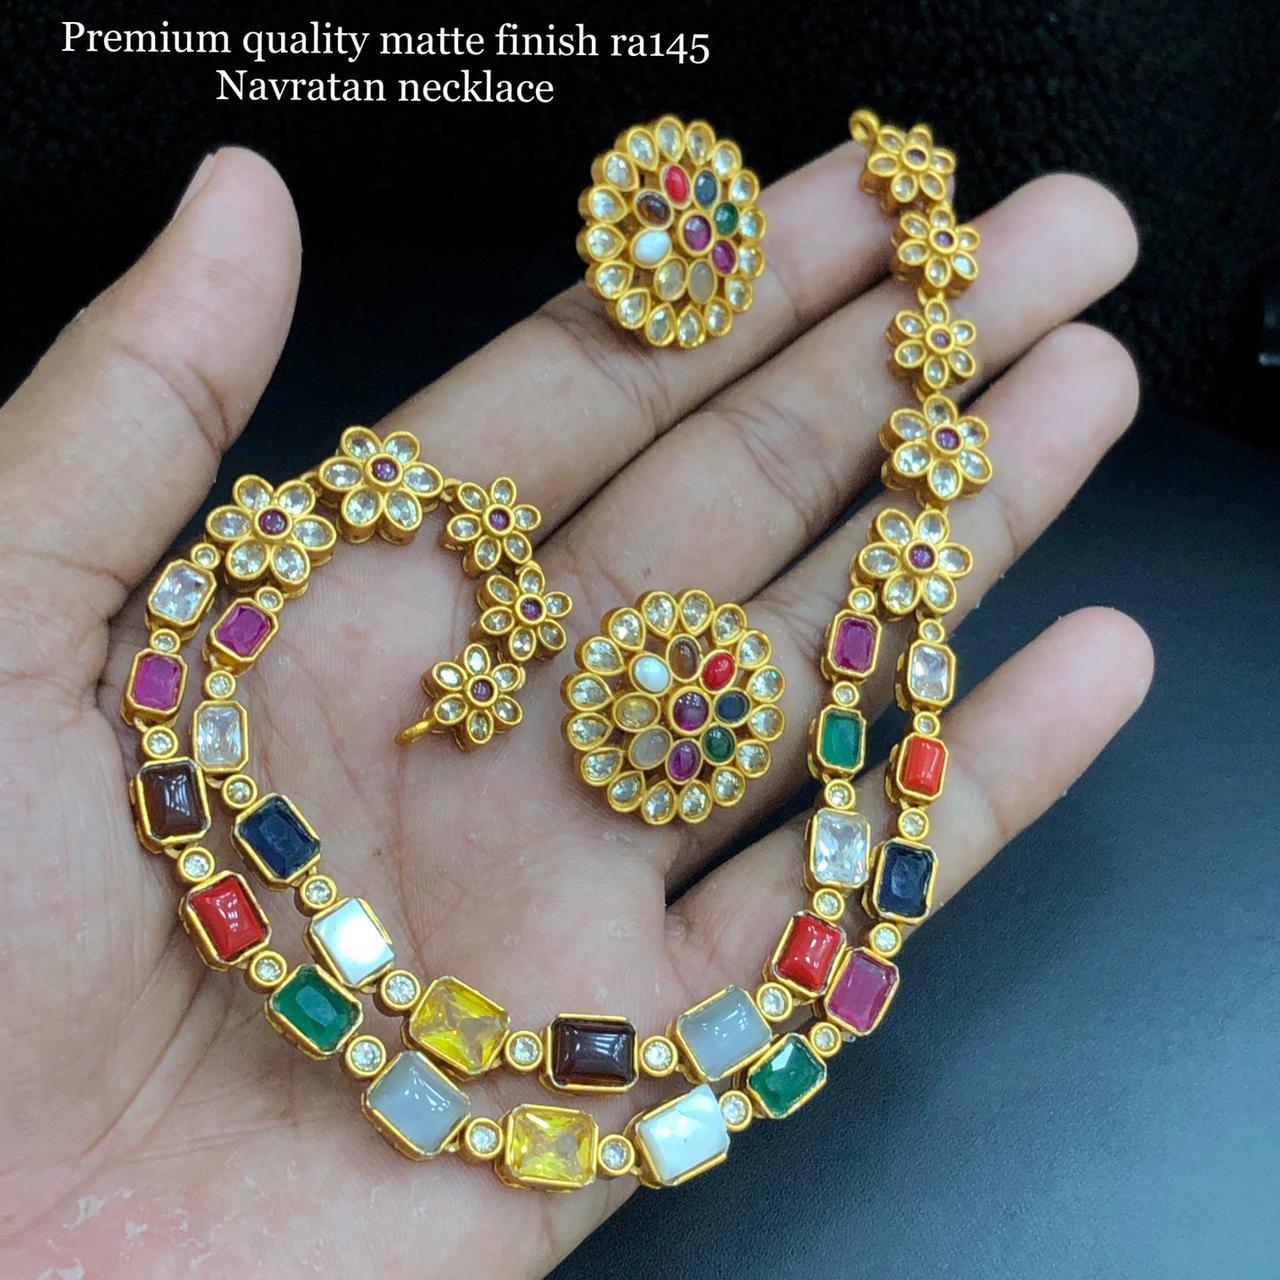 Gold Look a like Jewlery Collection June 2021 - Indian Jewelry Designs